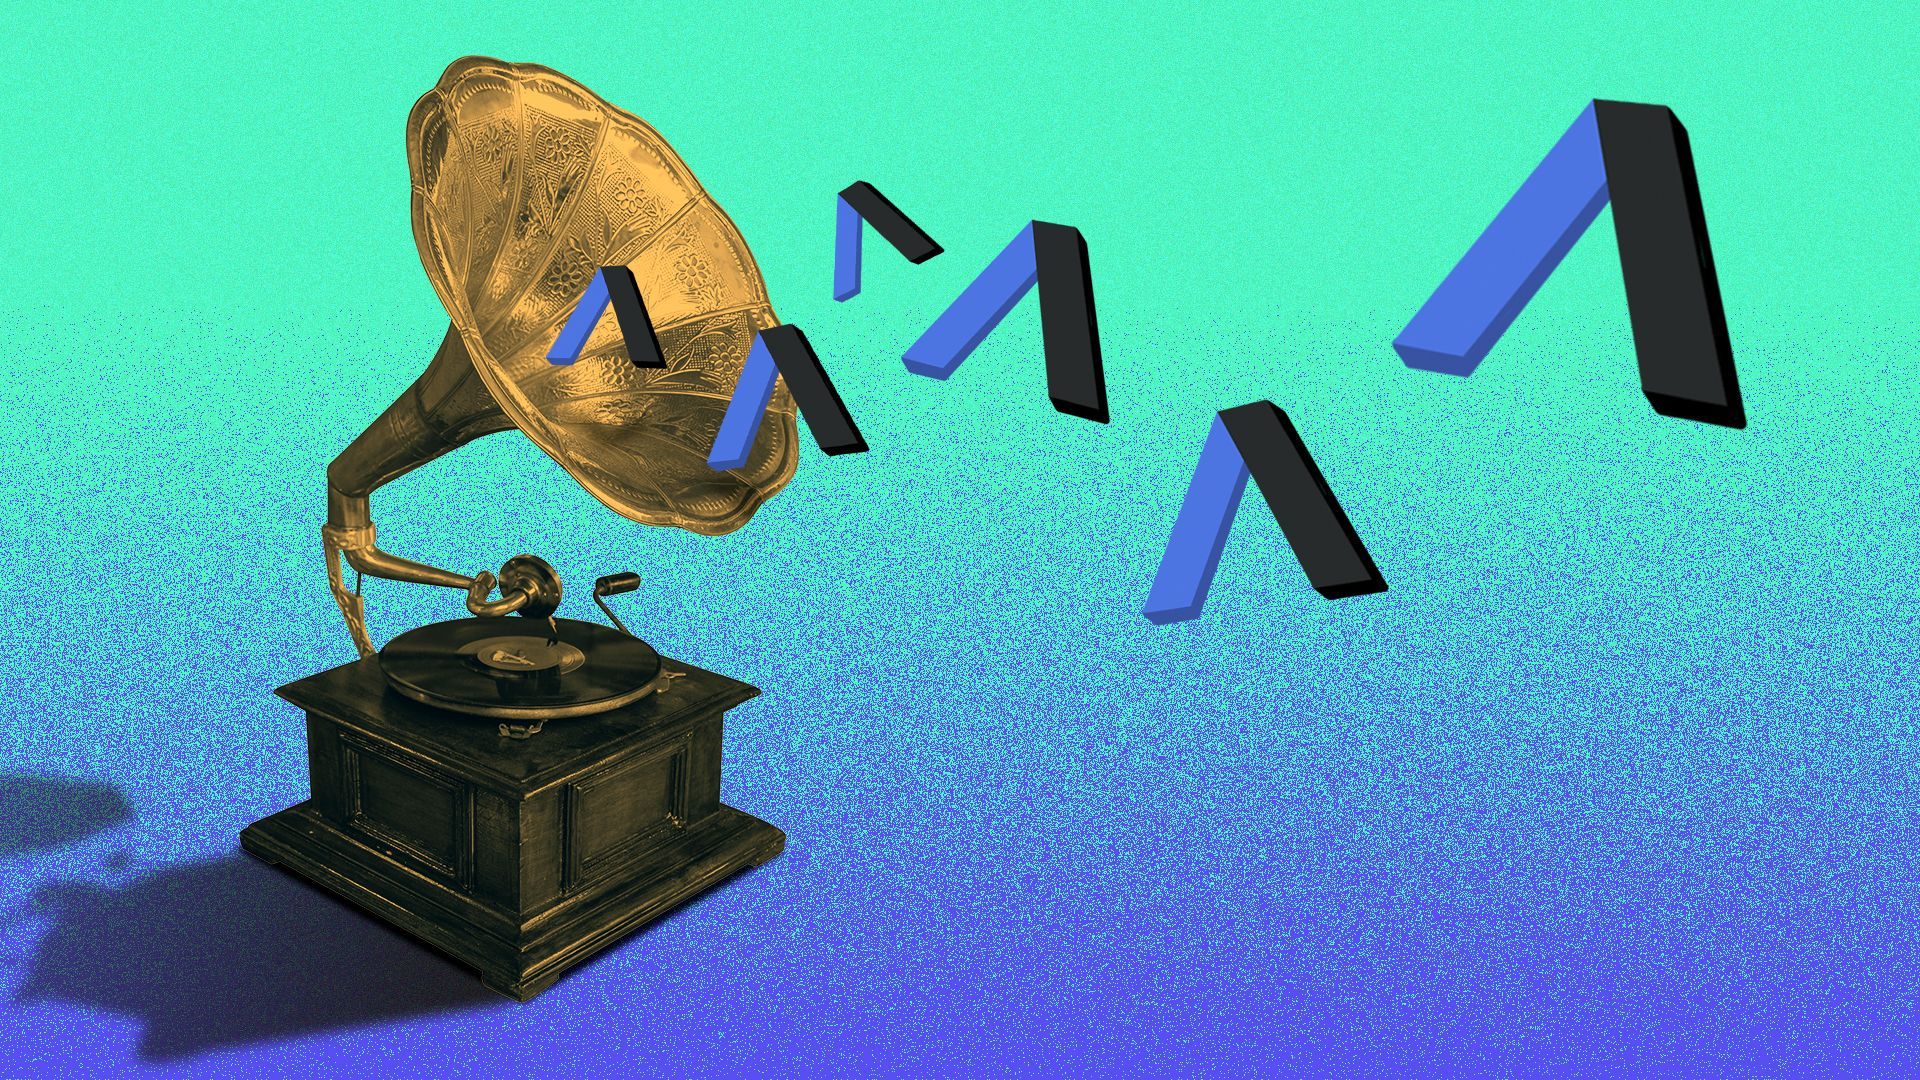 Illustration of a gramophone with Axios As coming out of it.